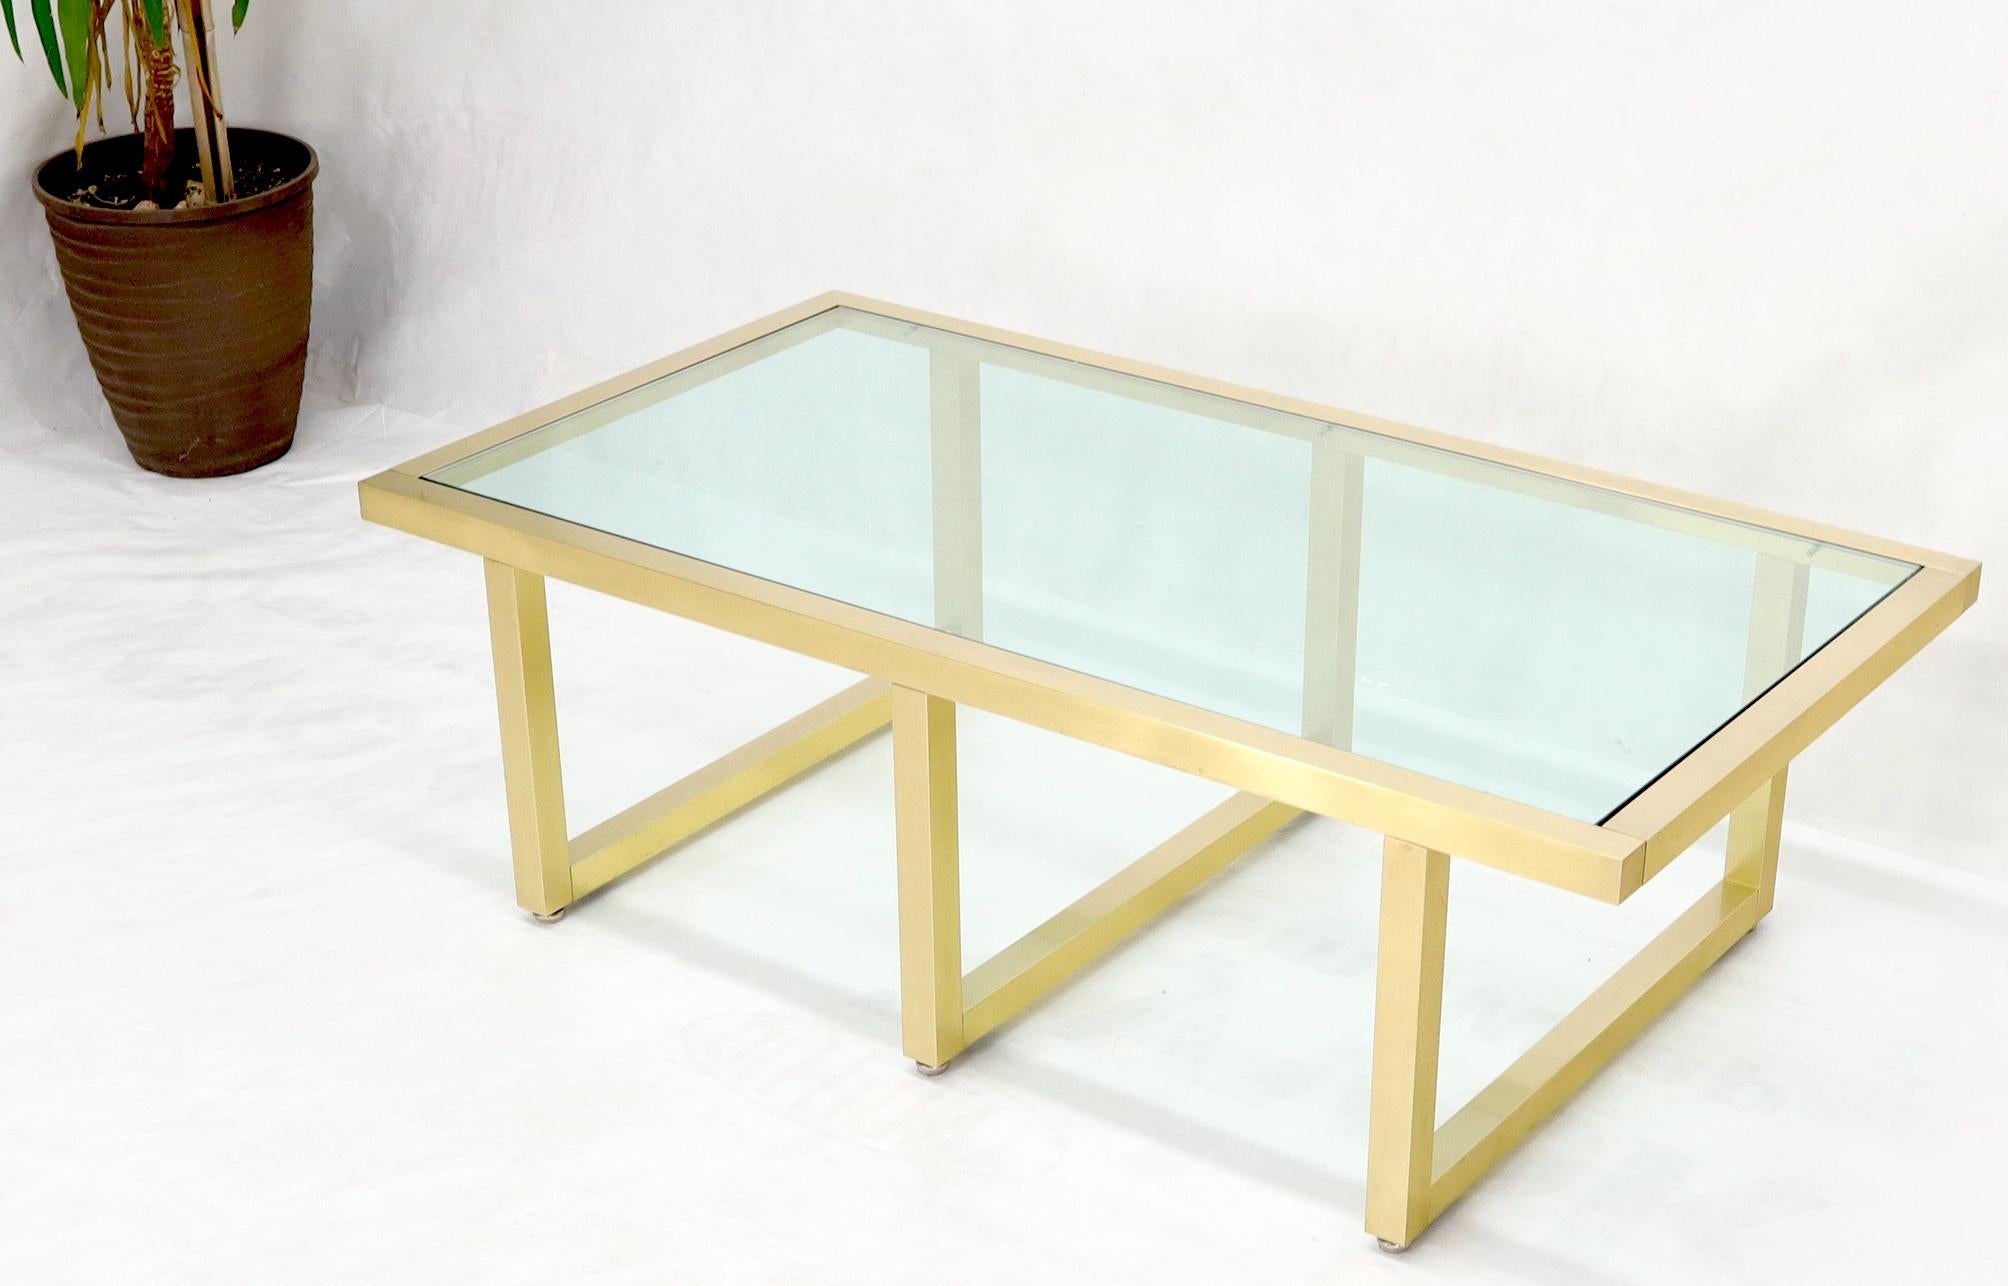 Heavy gage bolted together machined brass frame glass top coffee table.